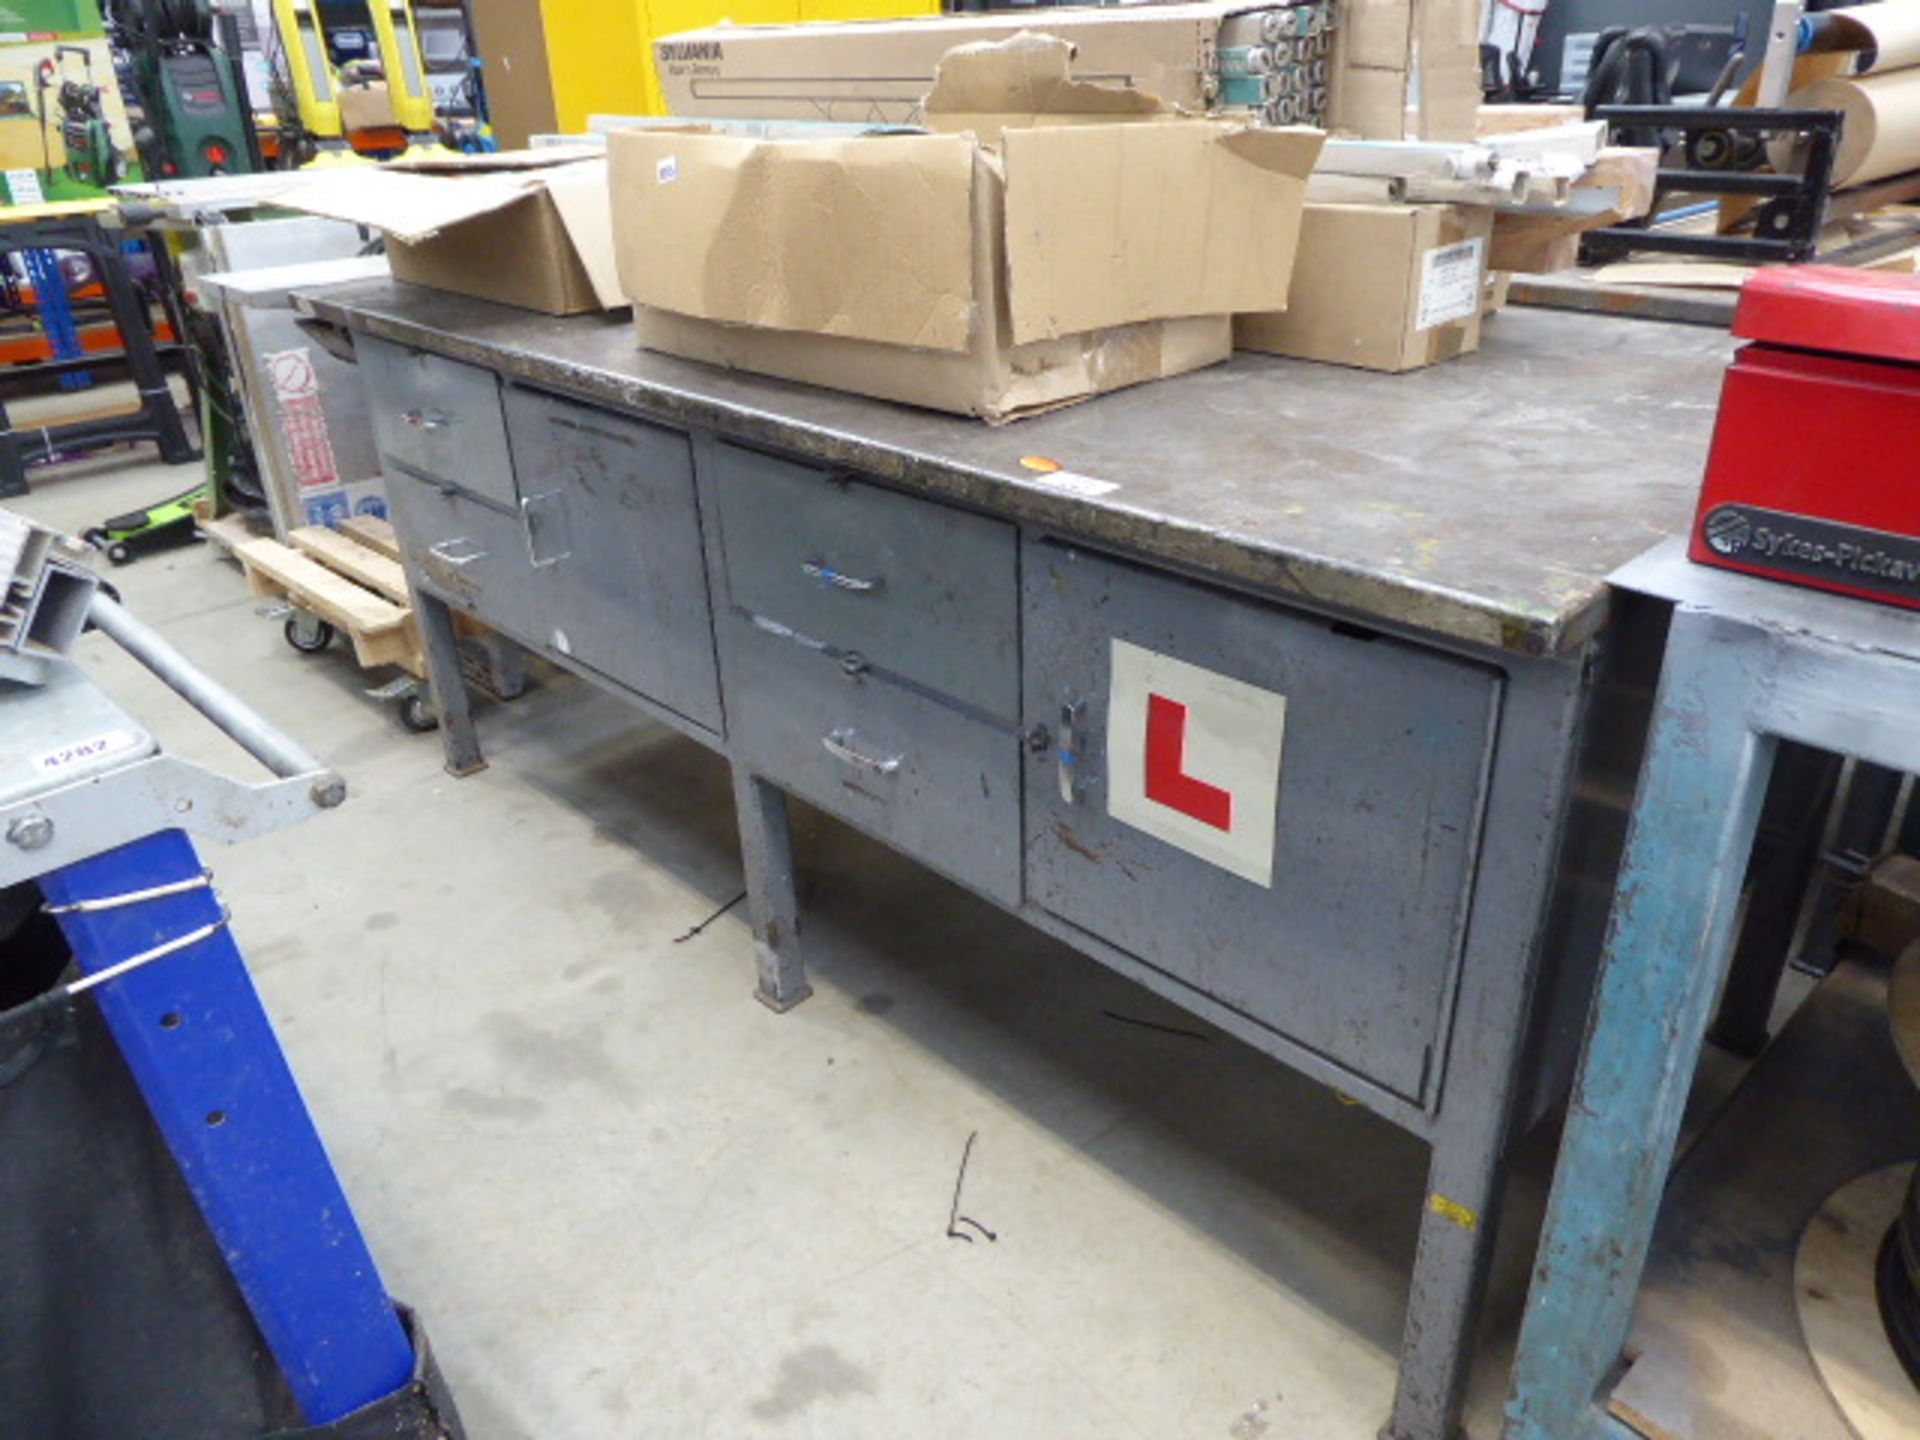 Large metal framed, metal topped work bench with drawers and cupboards under